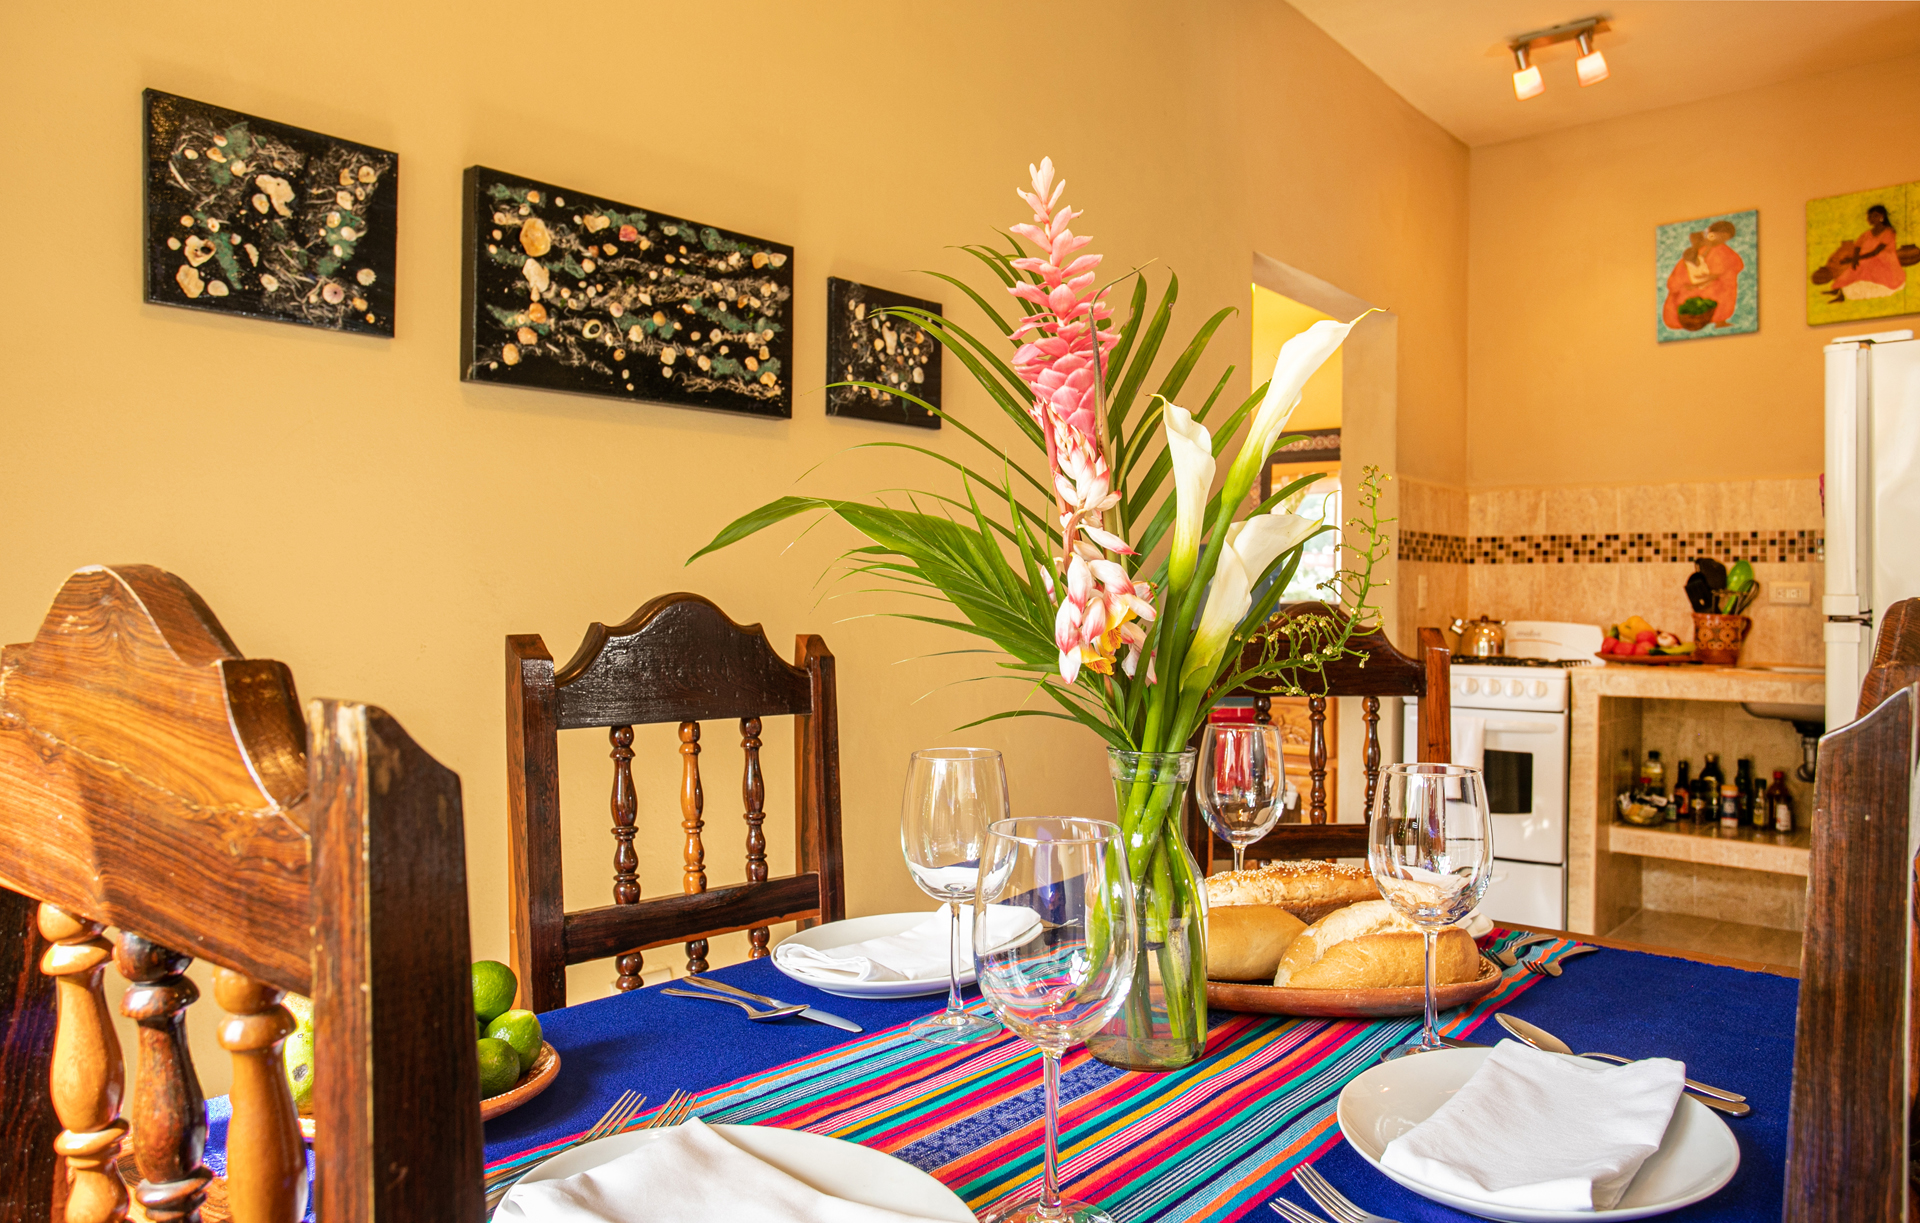 dining room with colorful table at casa marietas 1